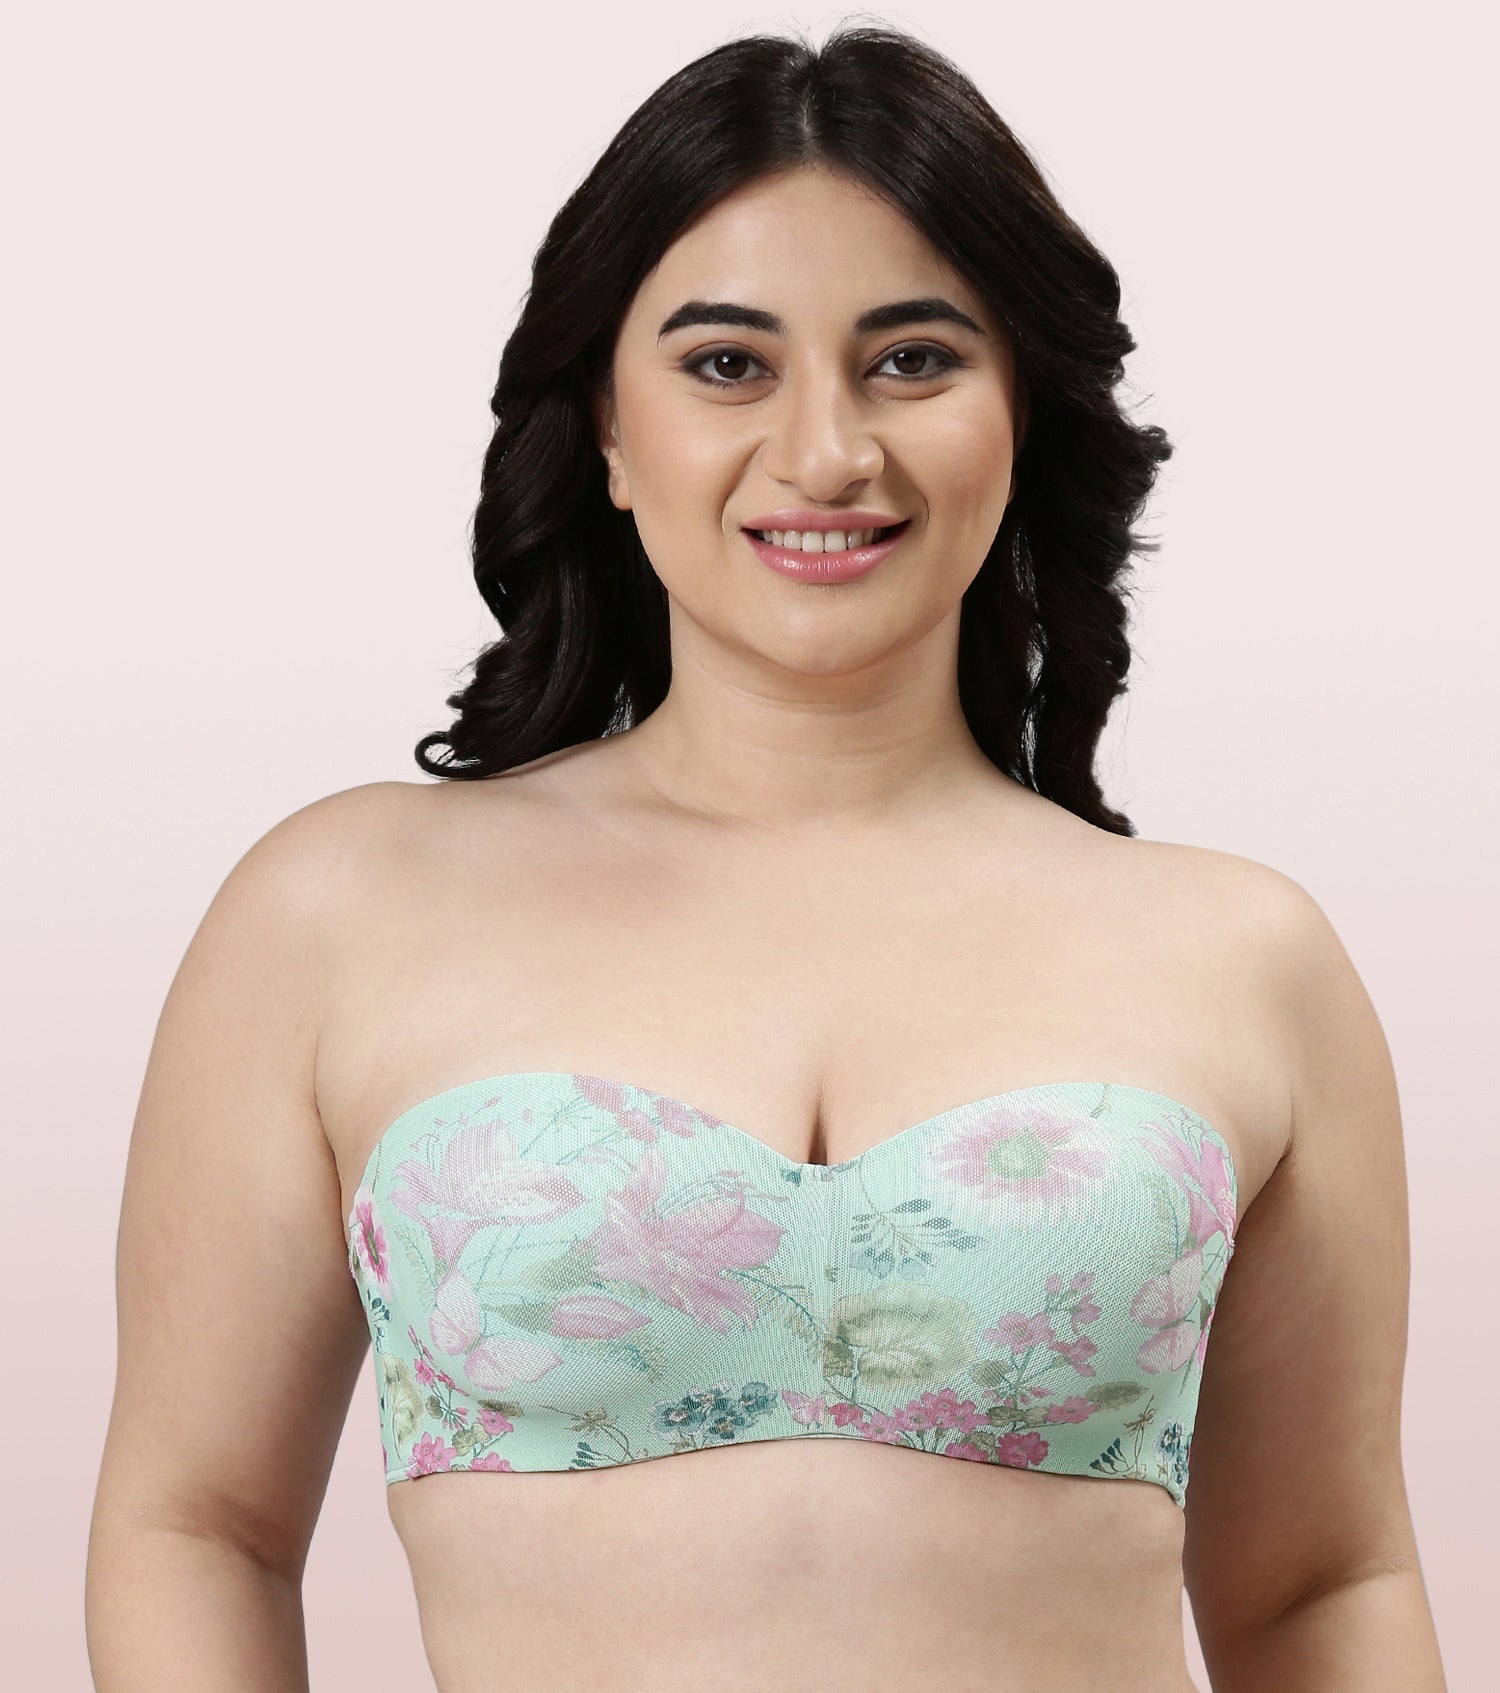 Enamor Full Figure, Strapless & Multi-Way Bra For Women - Padded, Wired Bra For Perfect Shape & Coverage | F074 | Mint Floral